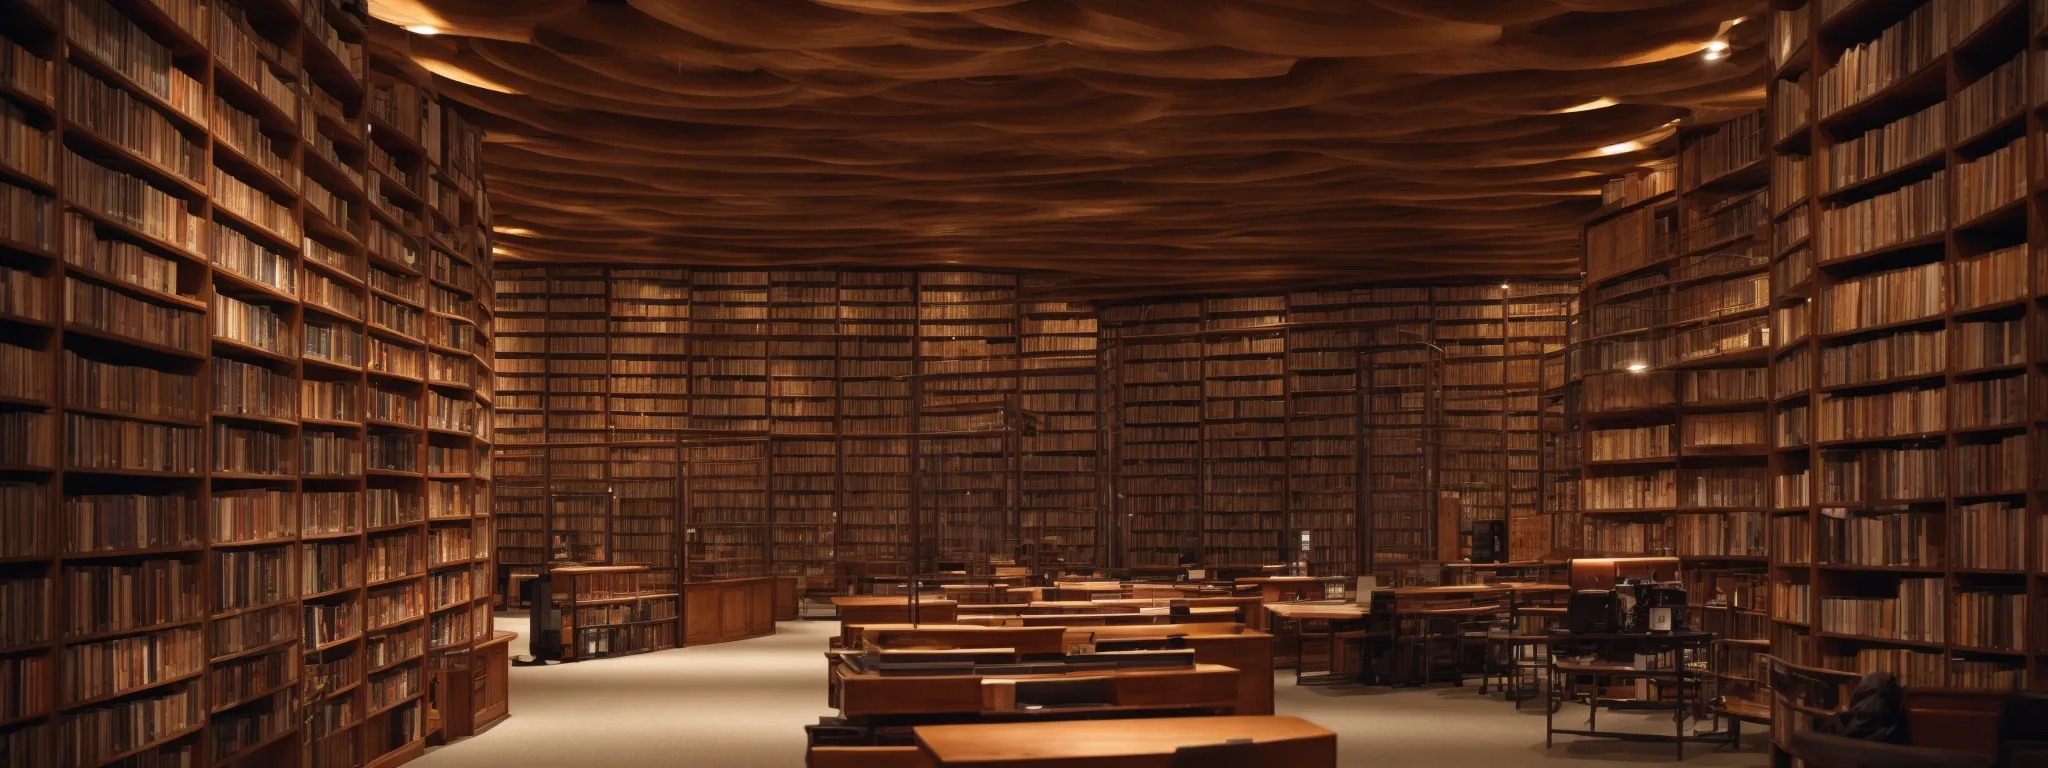 a panoramic view of a sprawling digital library with neatly organized virtual bookshelves, symbolizing categorized content across easily navigable web pages.